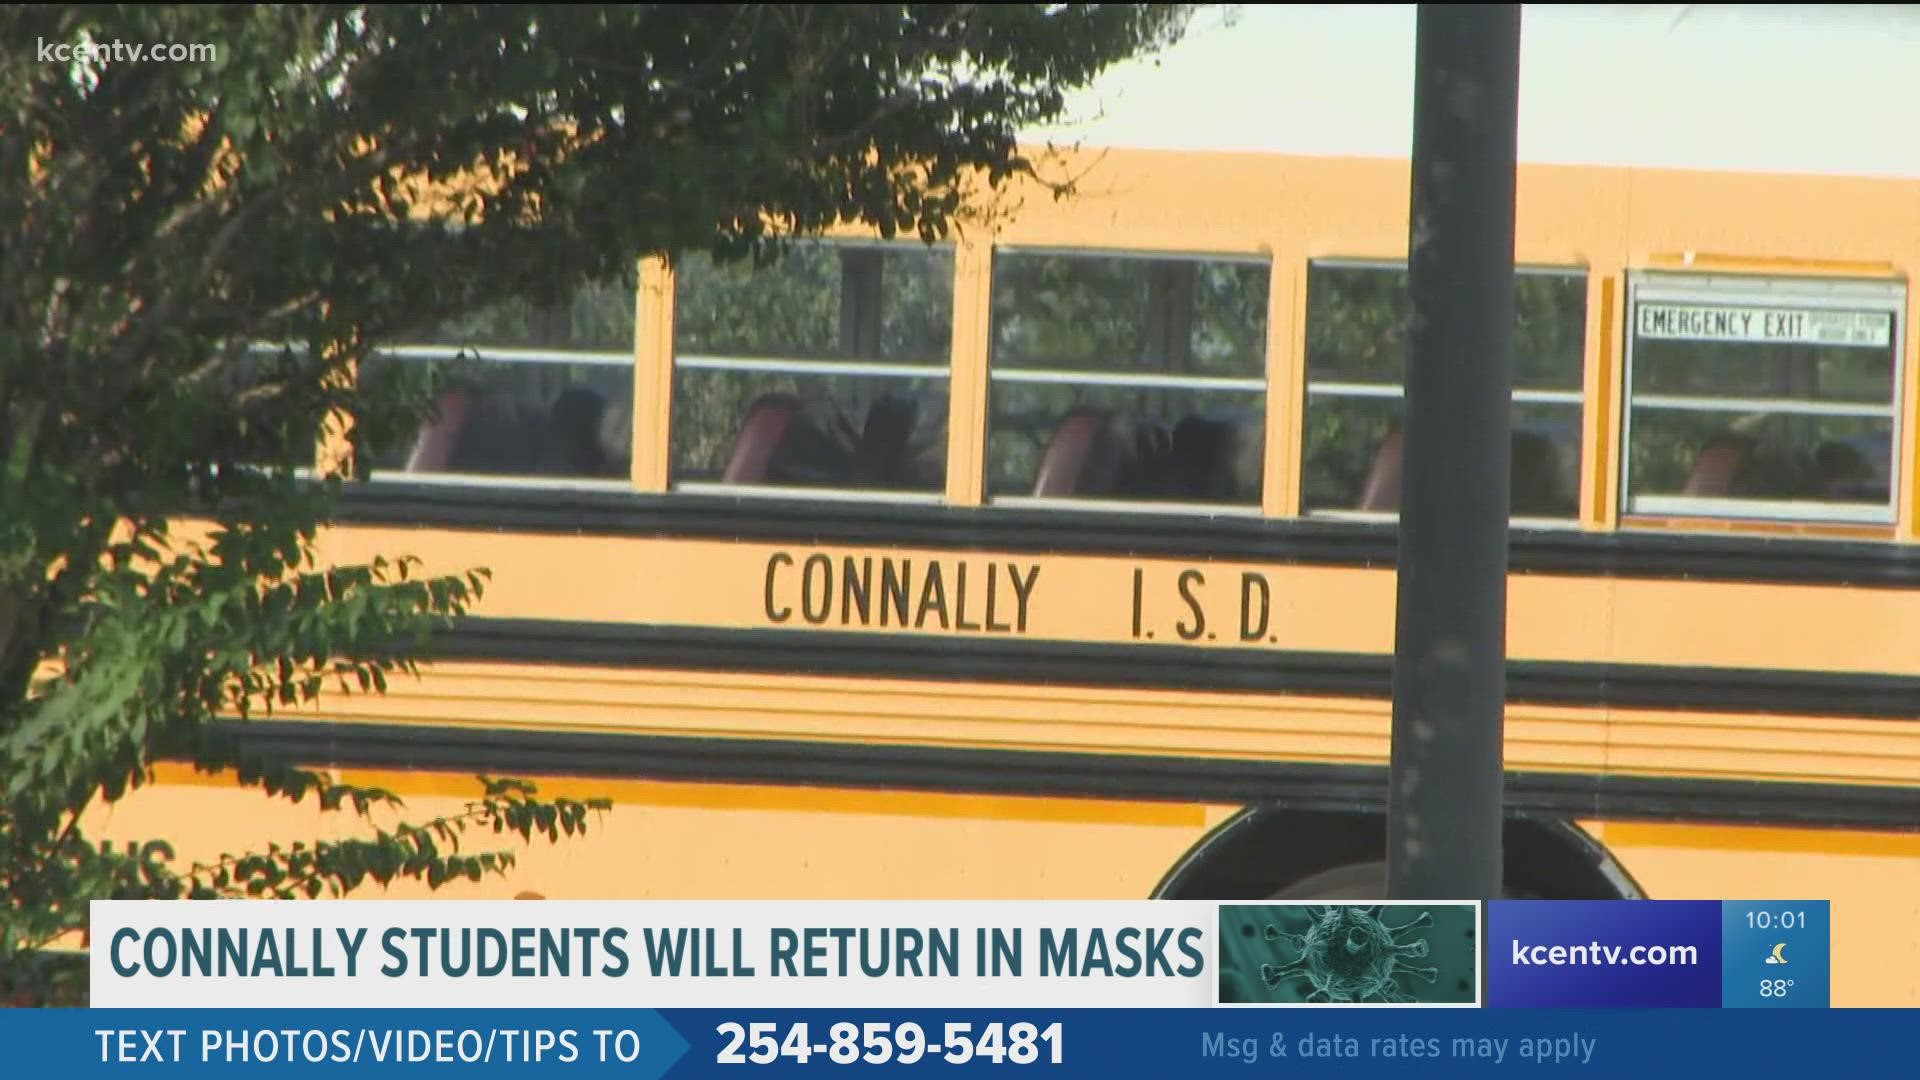 The school district said it will require face masks inside district buildings when classes resume following the Labor Day holiday.